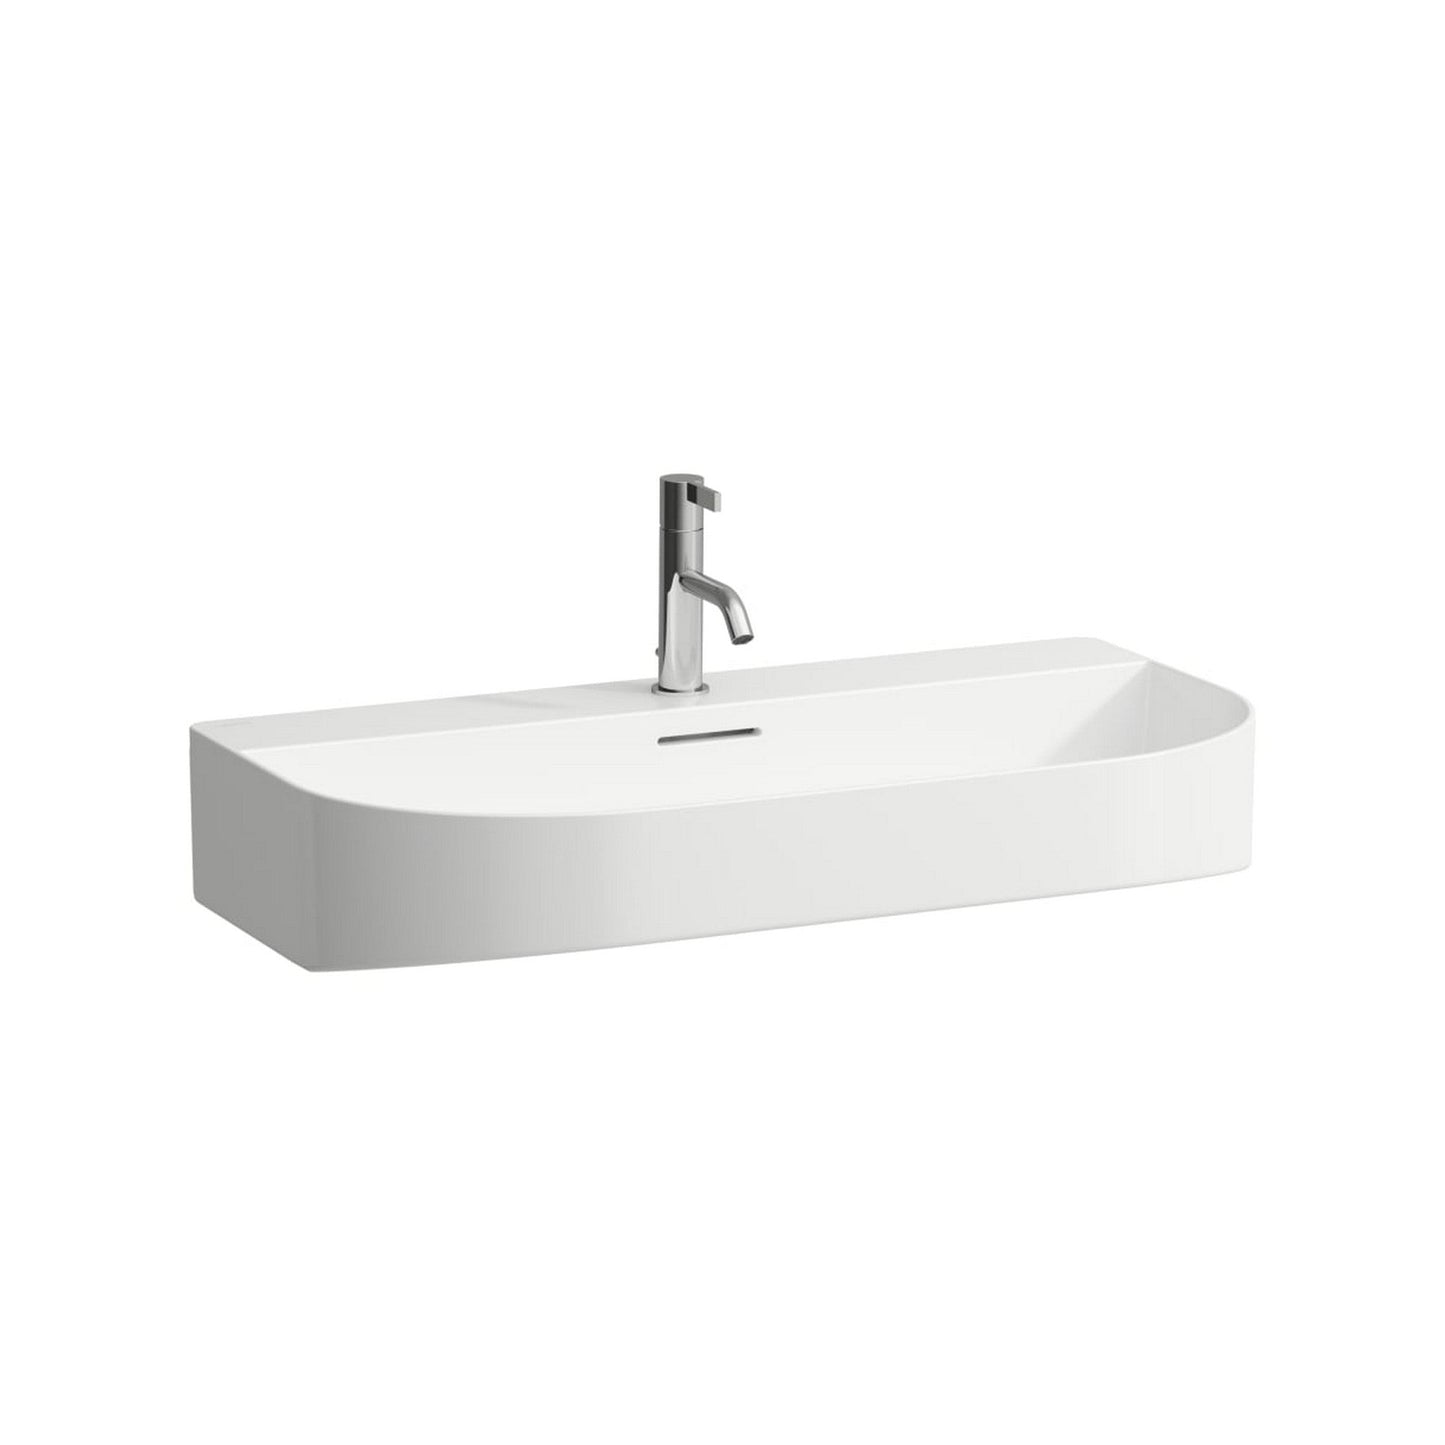 Laufen Sonar 32" Matte White Ceramic Countertop Bathroom Sink With With Faucet Hole